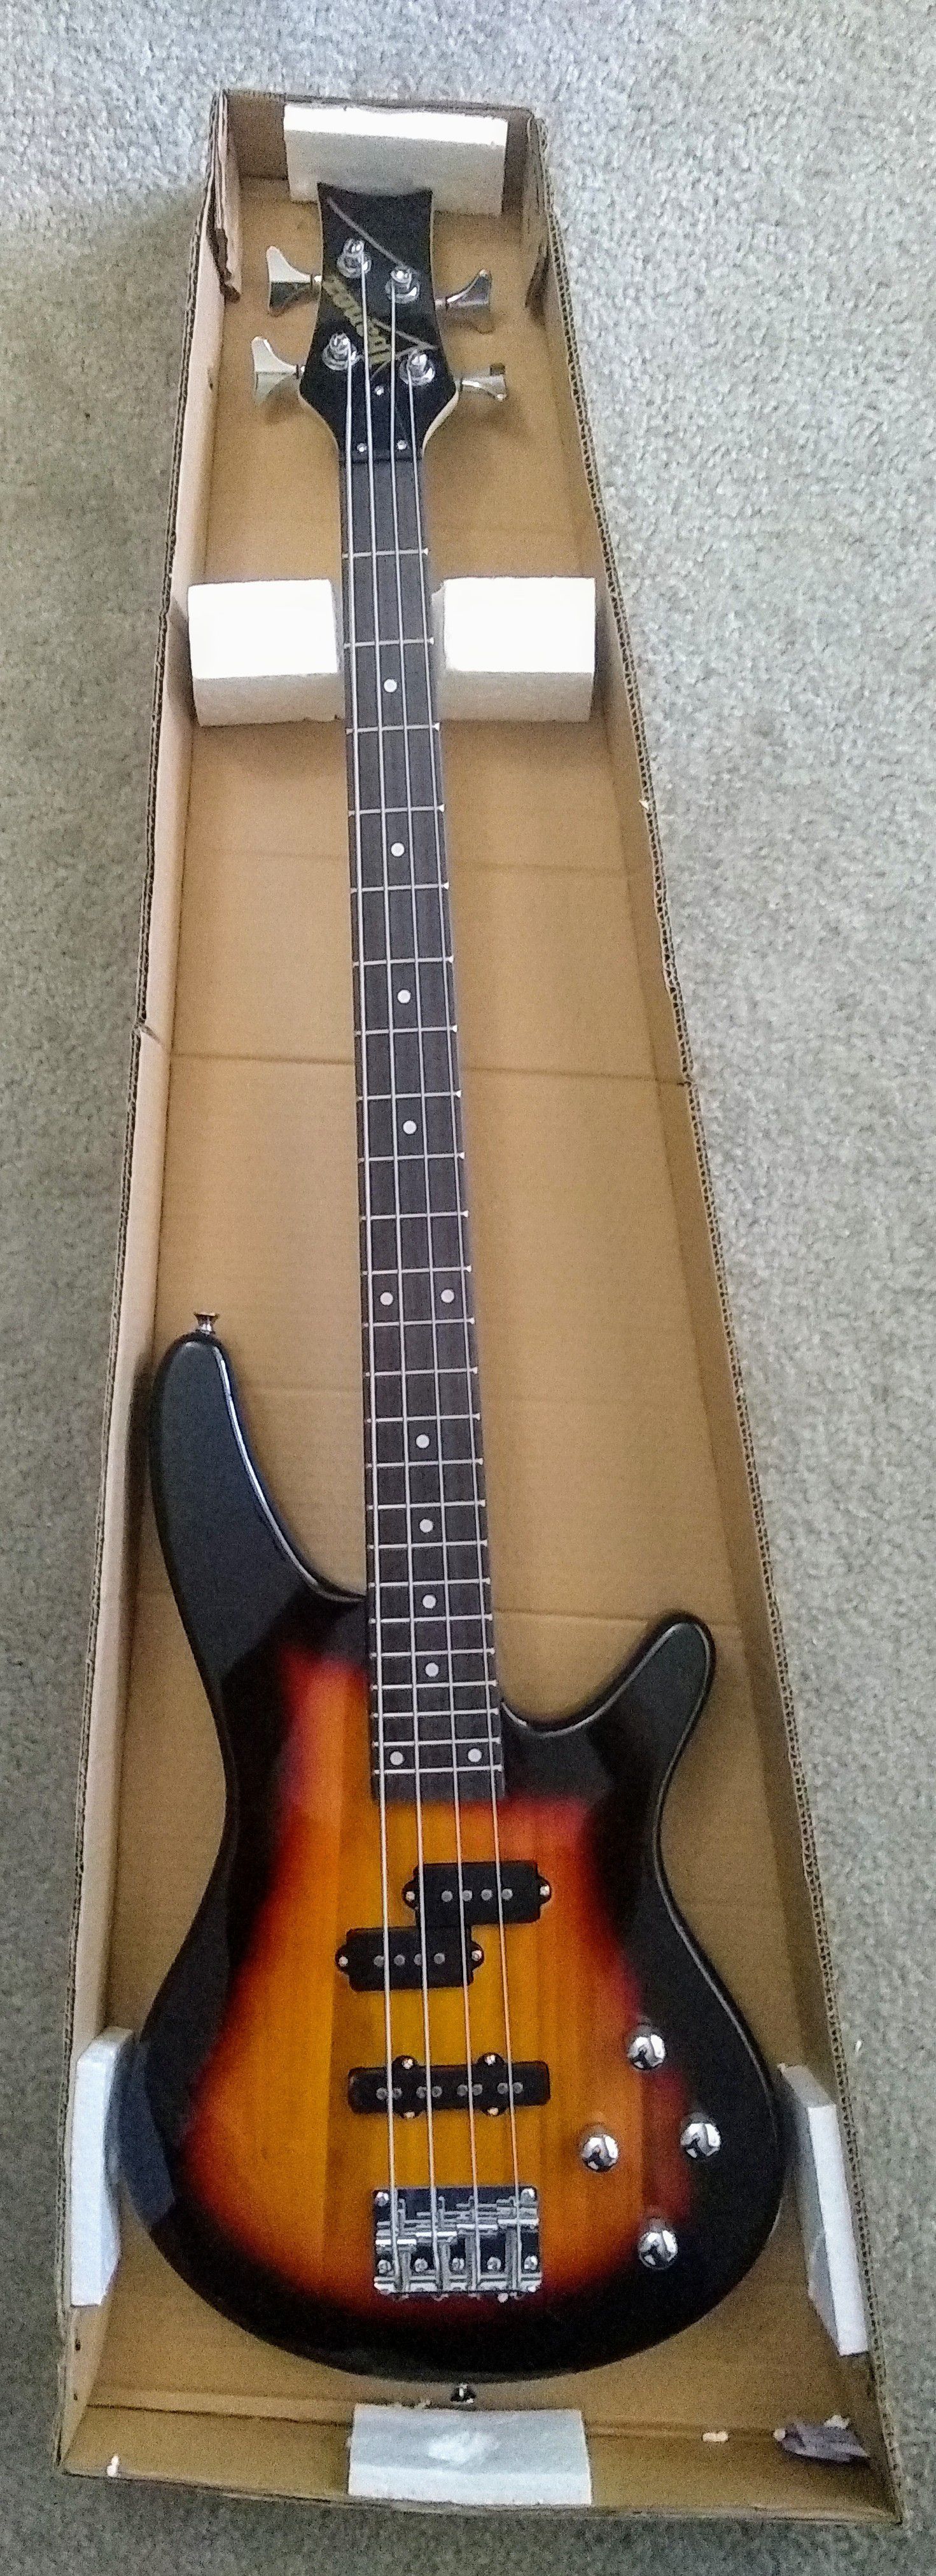 Bass Ibanez, electric bass guitar full size